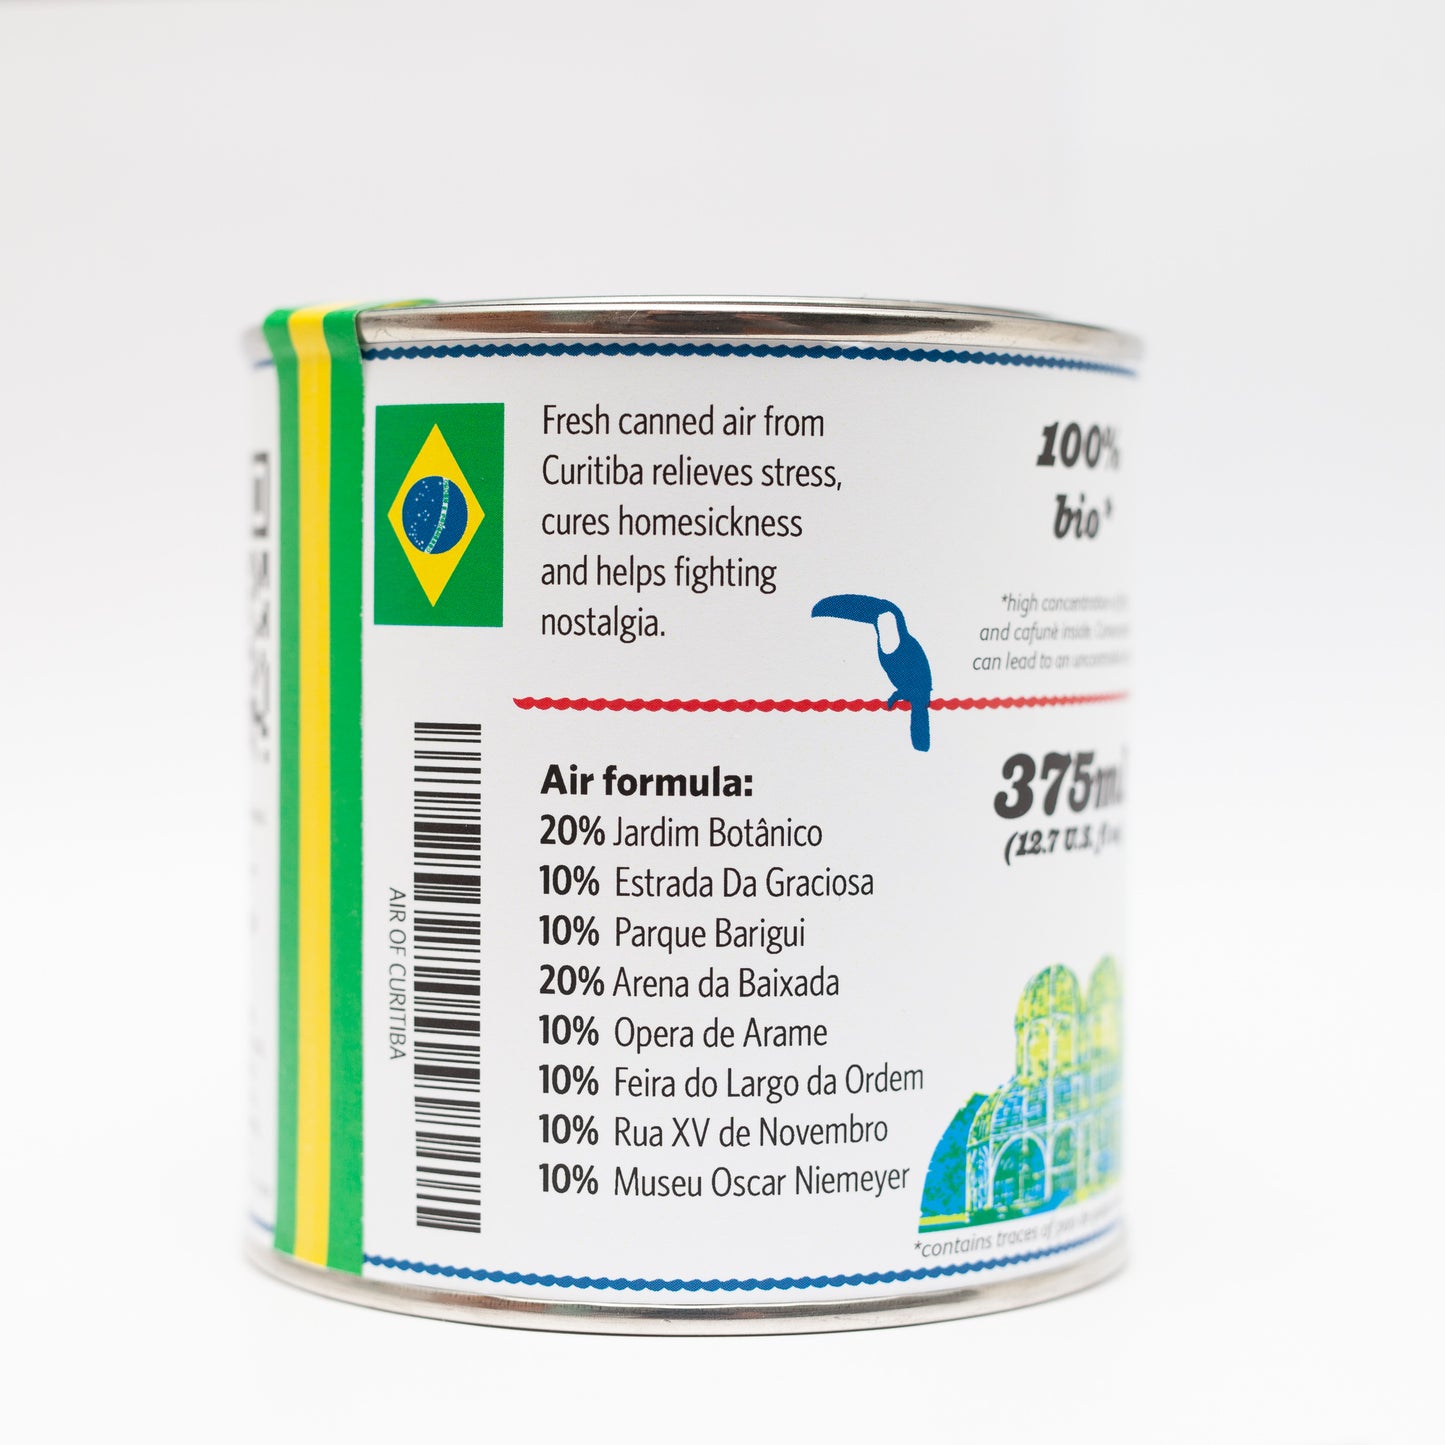 Canned Air of Curitiba